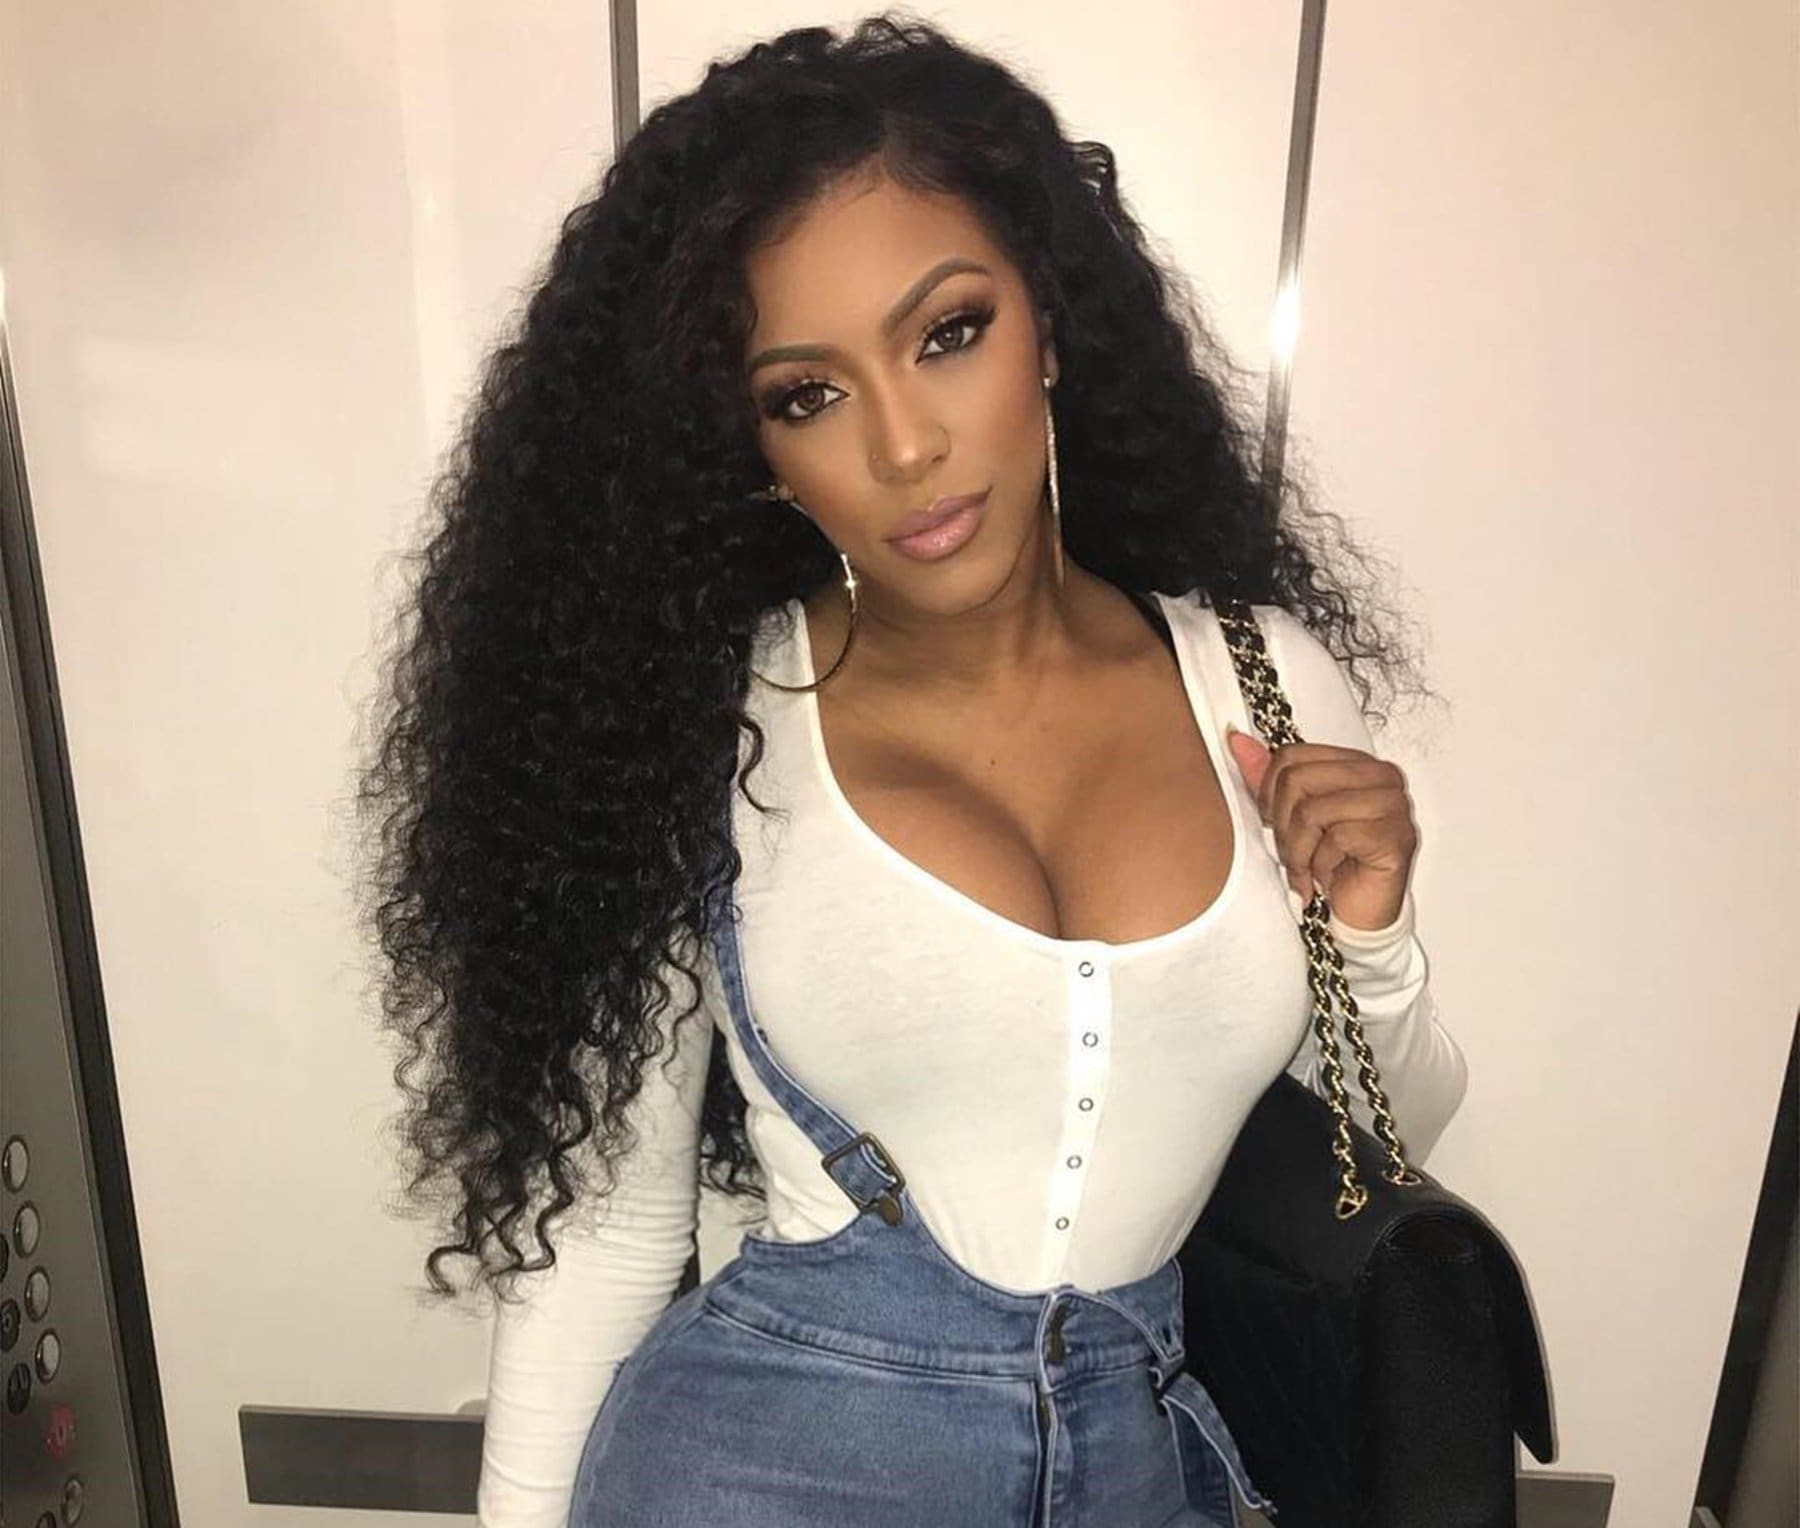 Porsha Williams Shares Her Full Podcast Trailer - Check It Out Here